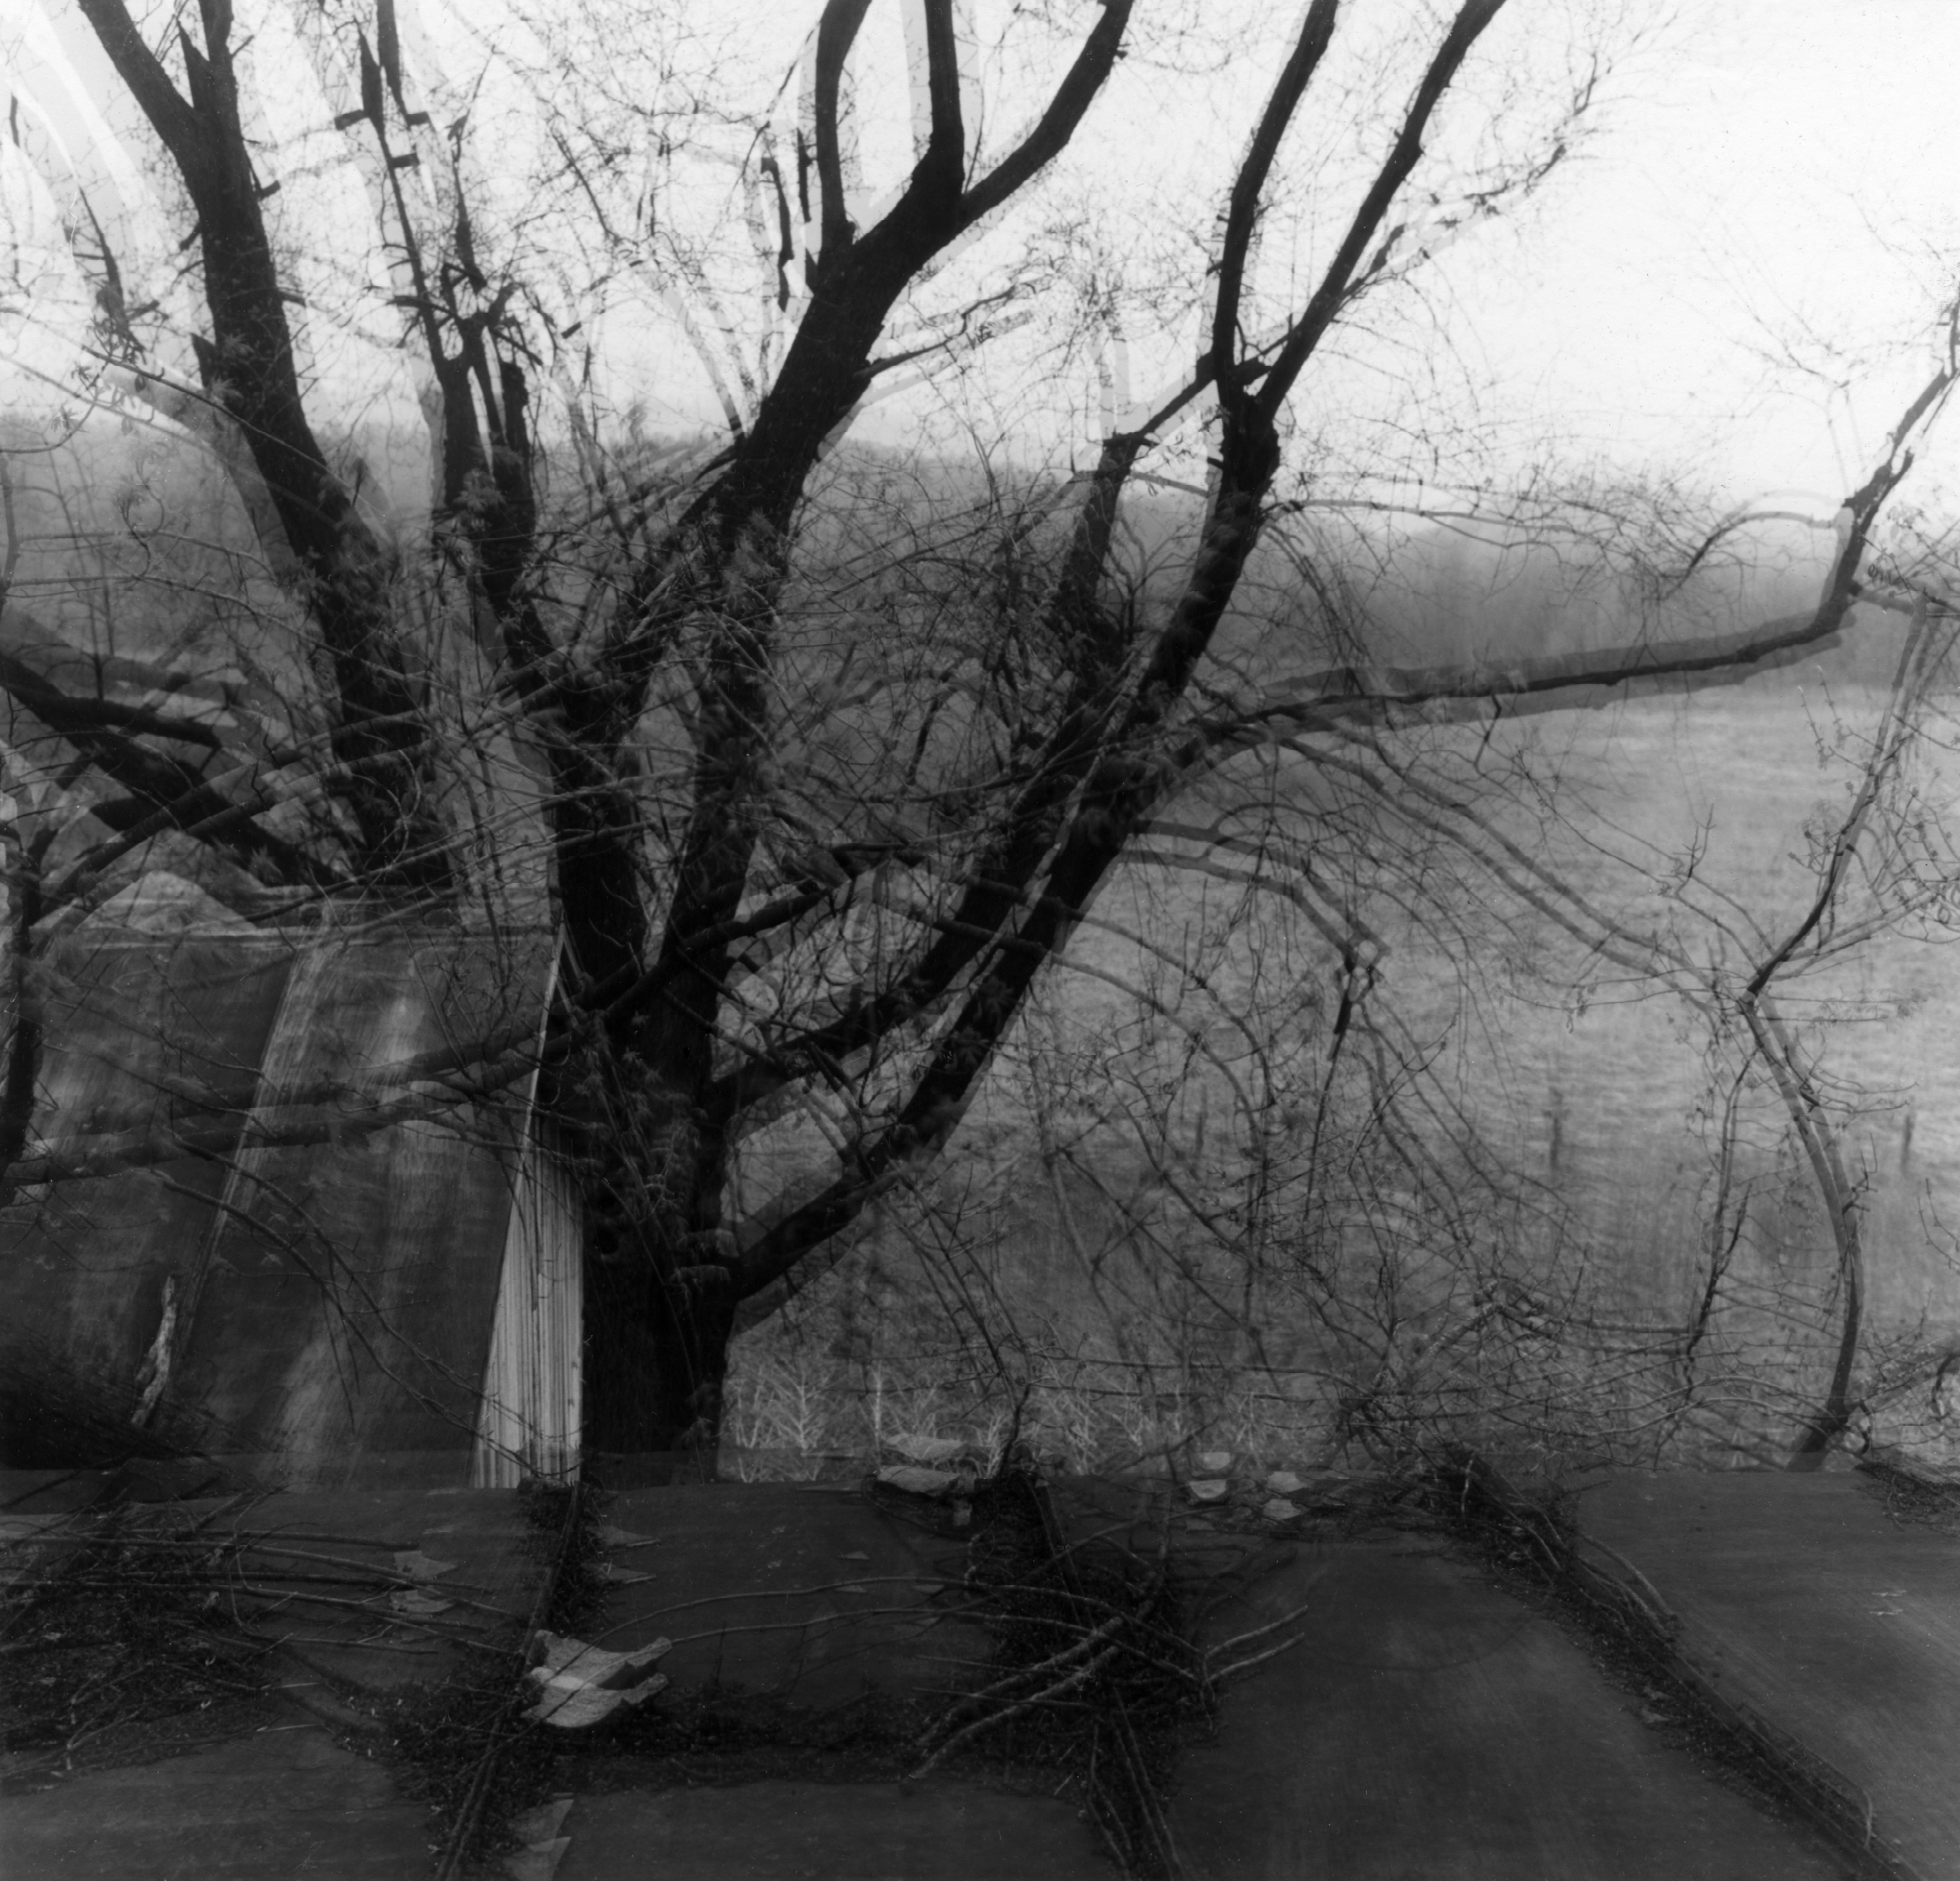 Black and white photograph of the view from atop a roof depicting a bare tree against a field with a motion blurred effect